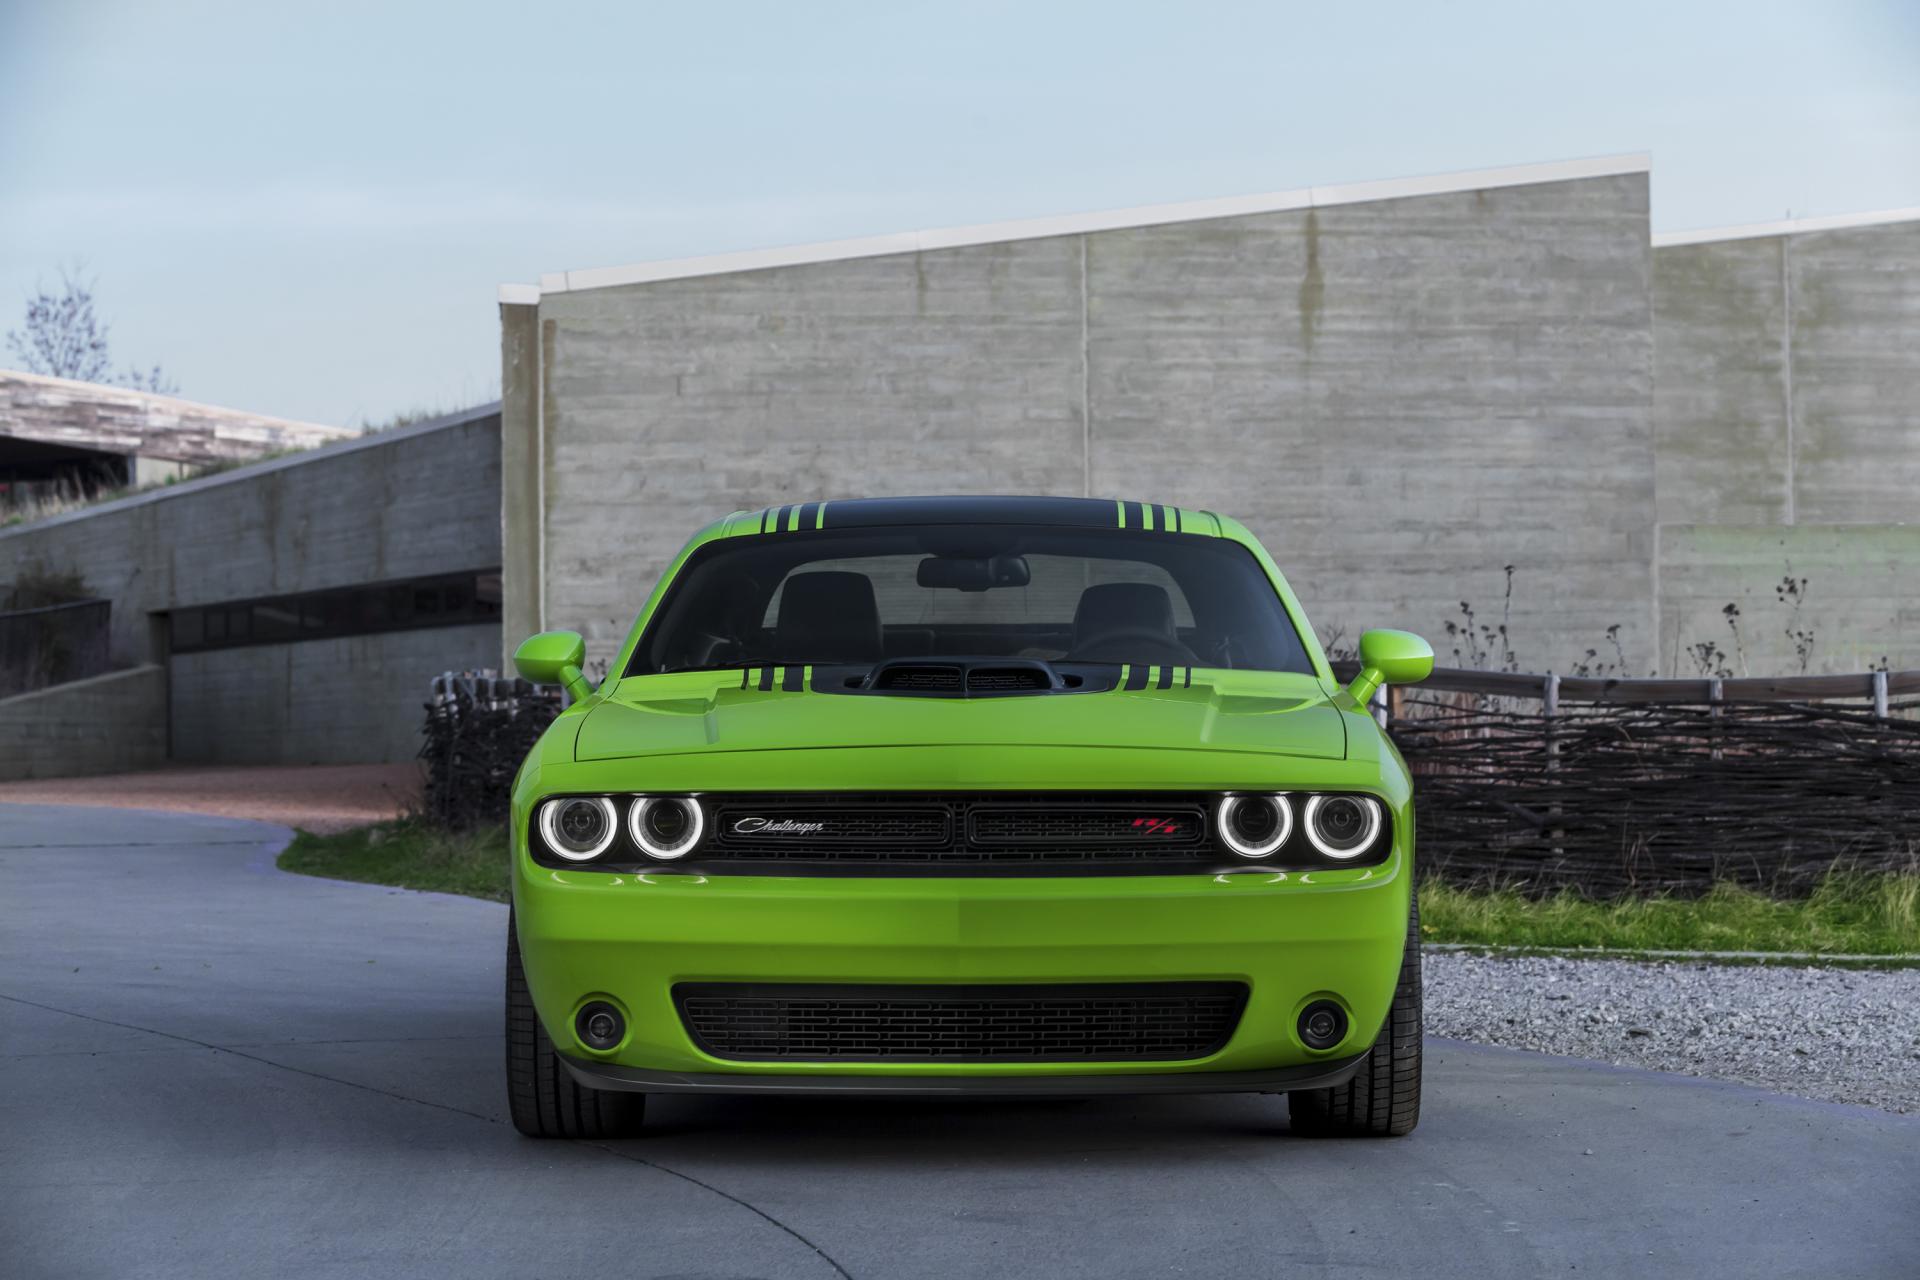 2015-Dodge-Challenger-Coupe-069 Wallpaper